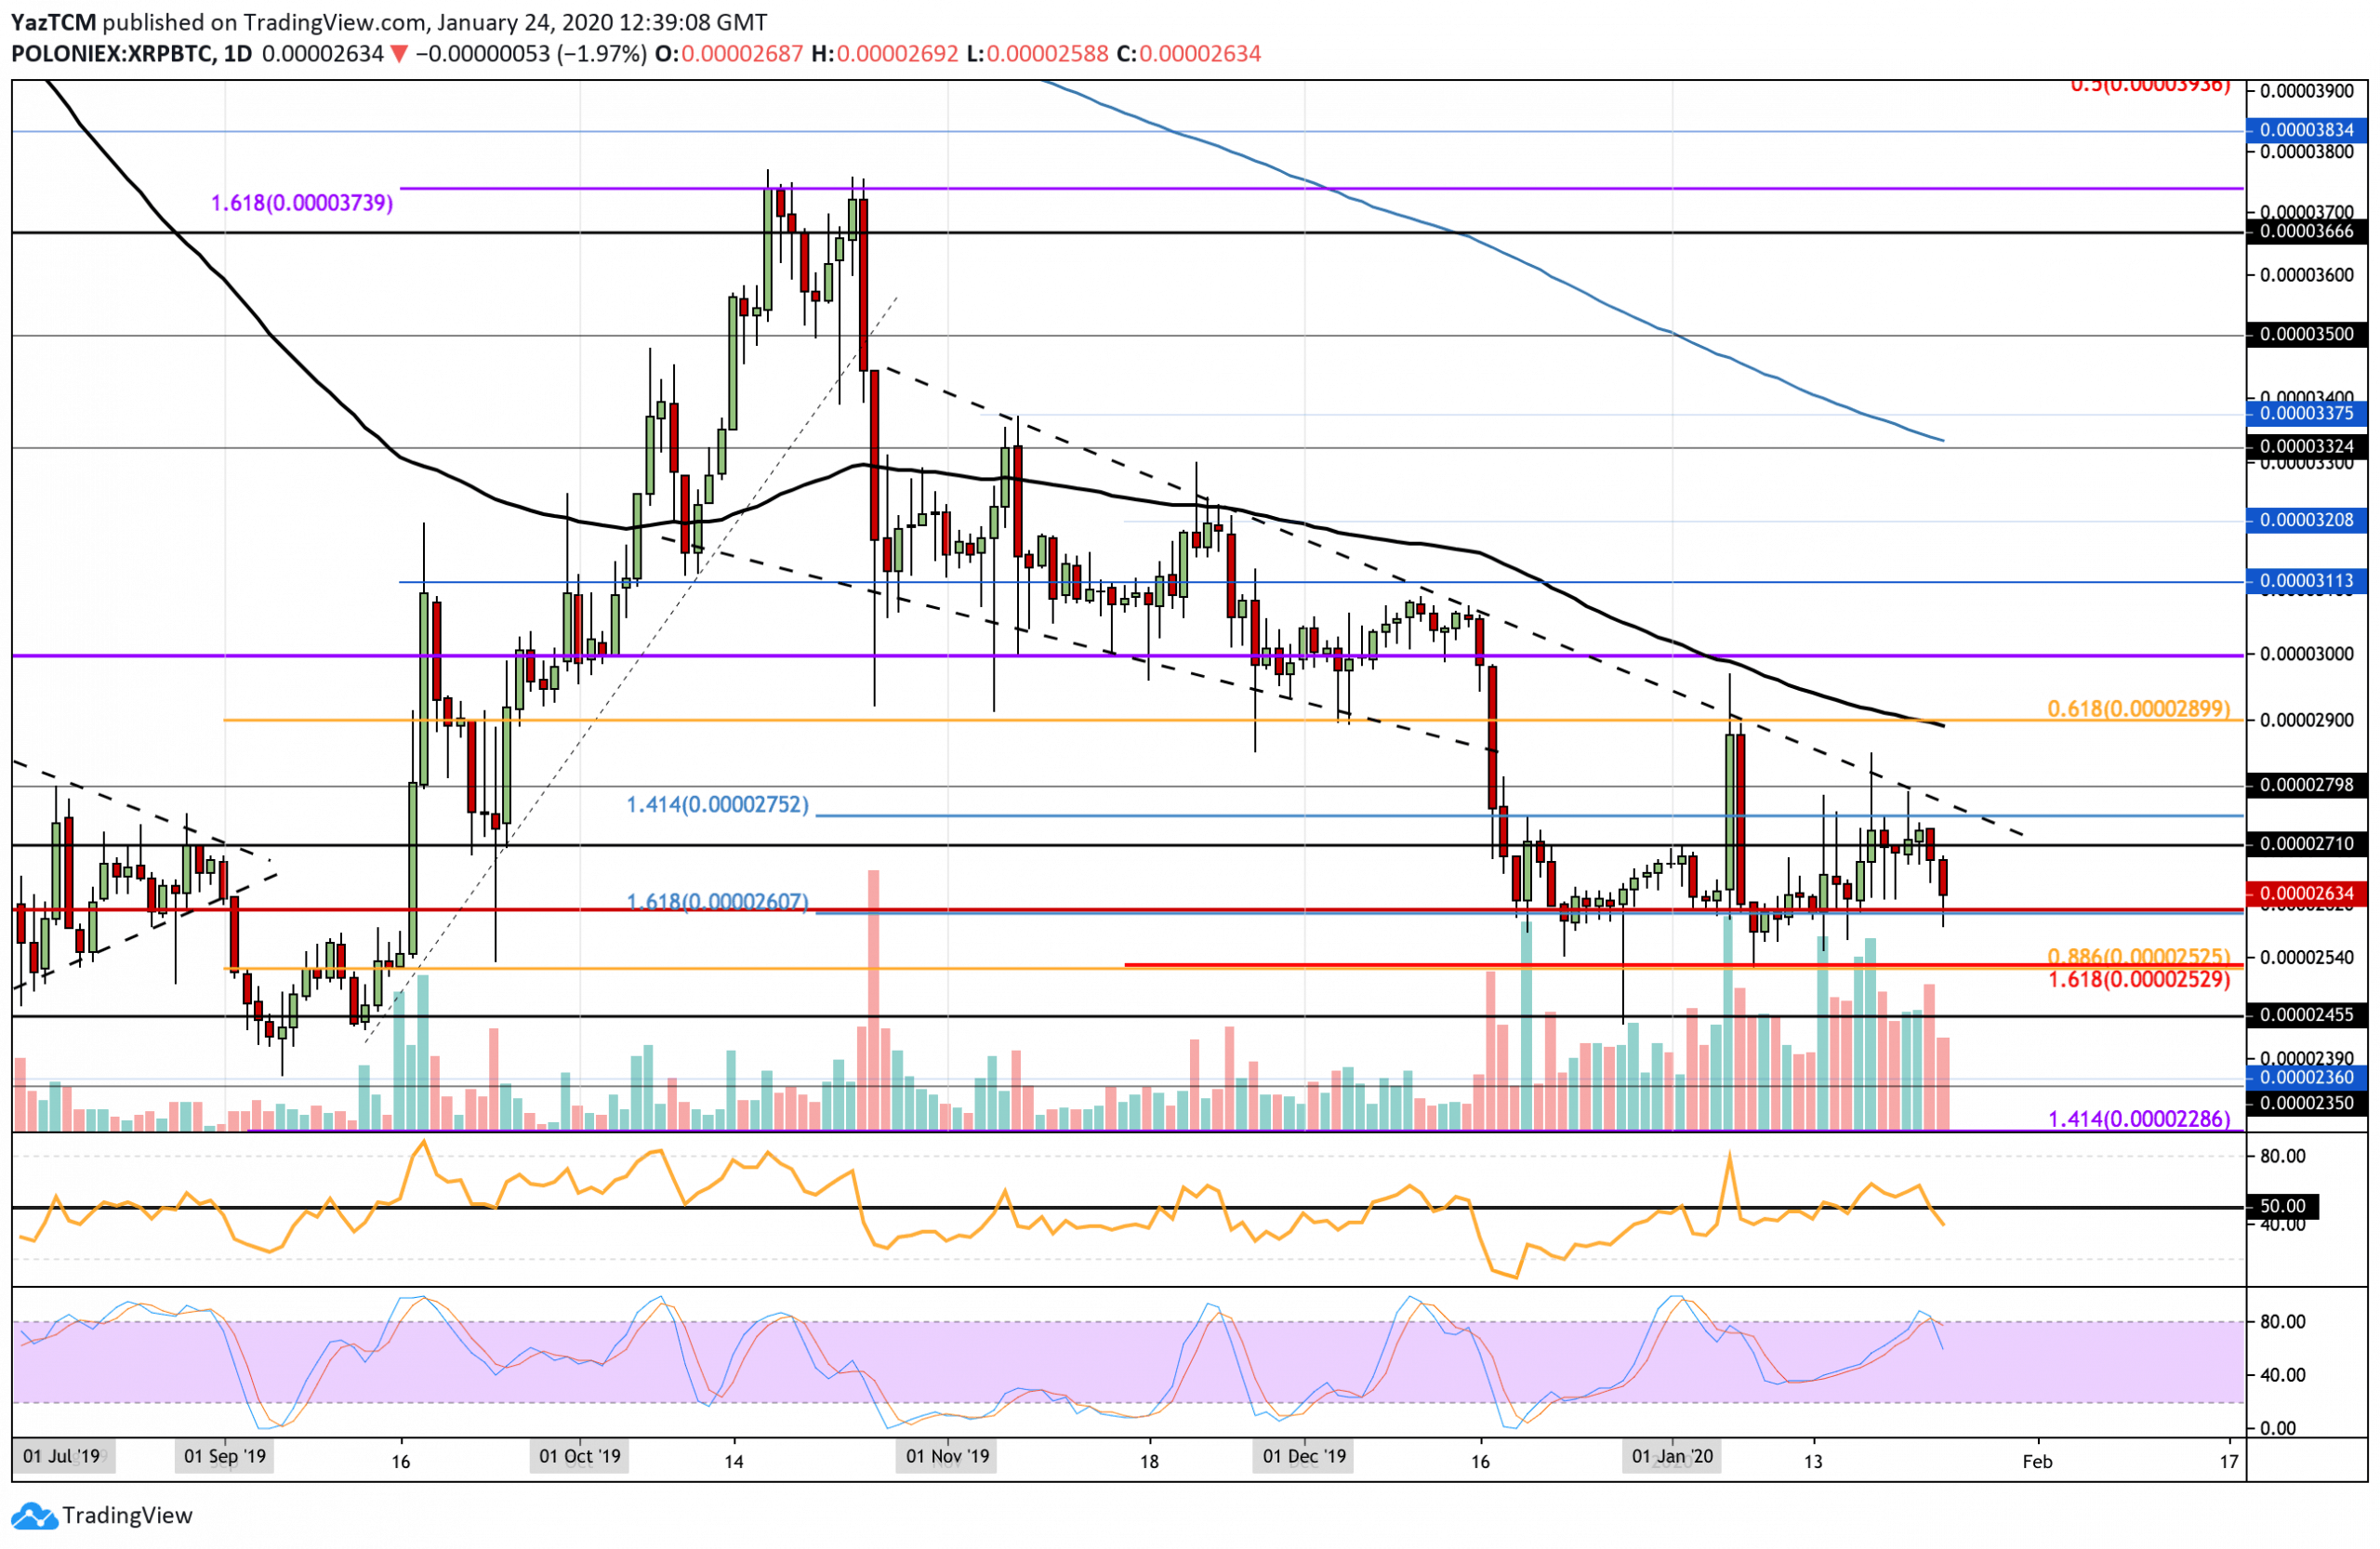 Crypto Price Analysis & Overview January 24th: Bitcoin, Ethereum, Ripple, Bitcoin Cash, and Dash